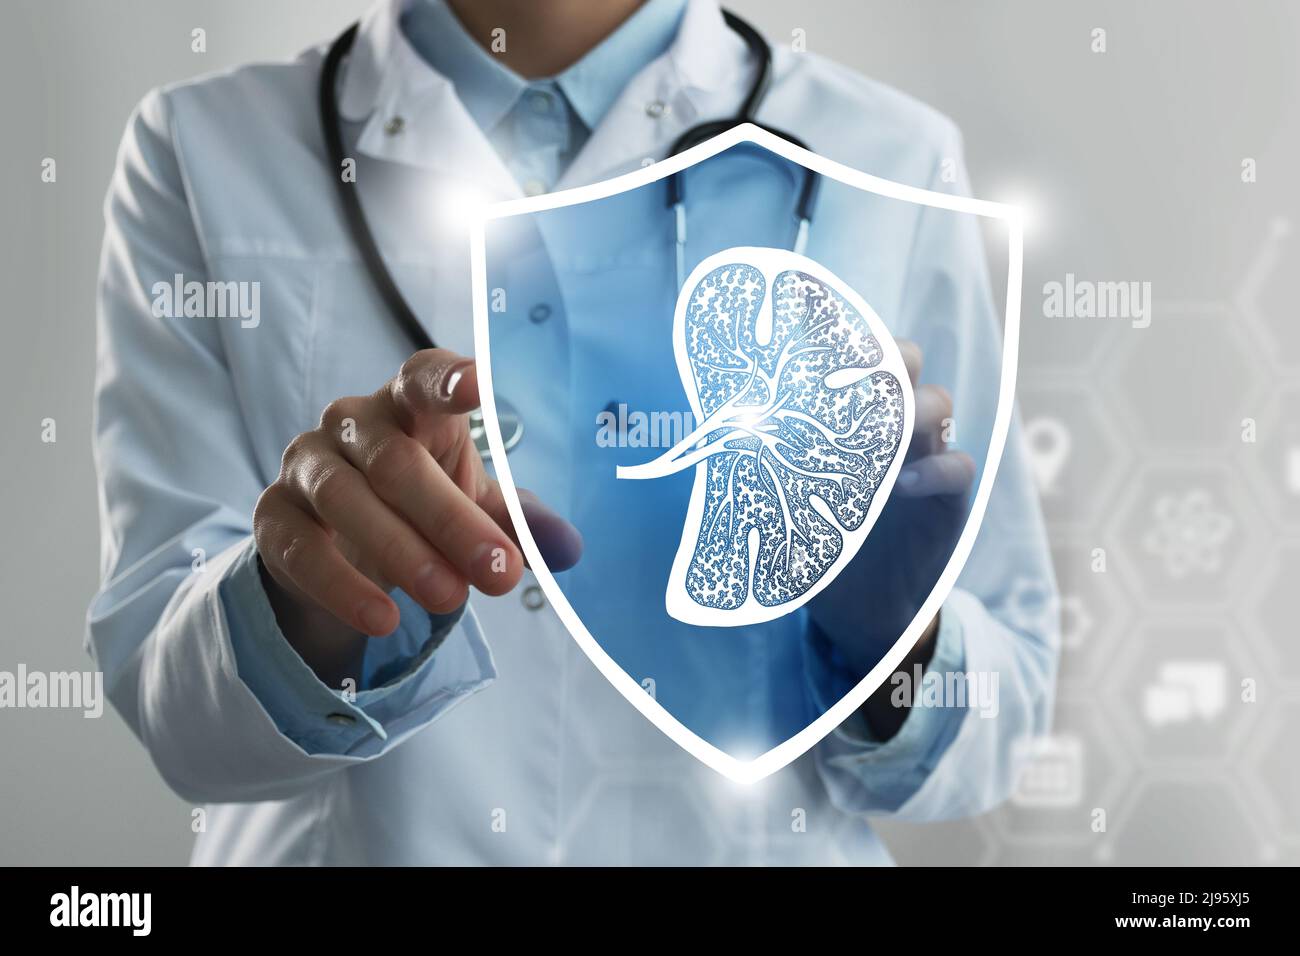 Protecting patient`s health and recovery concept. Neutral color palette, copy space for text. Stock Photo